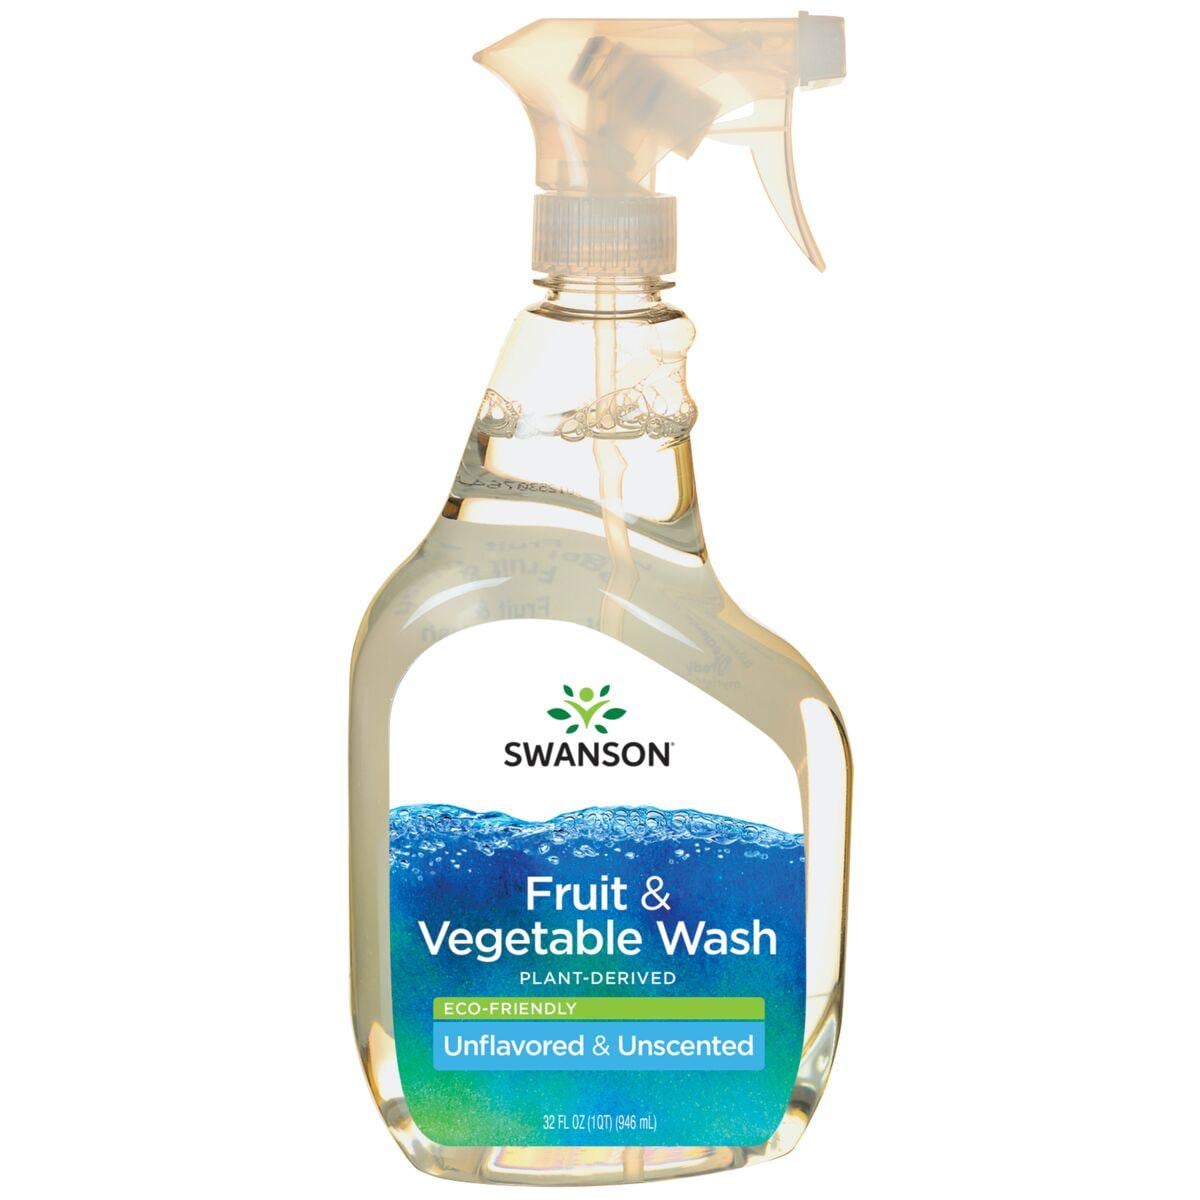 Swanson Healthy Home Fruit & Vegetable Wash - Eco-Friendly Unflavored Unscented 32 fl oz Liquid